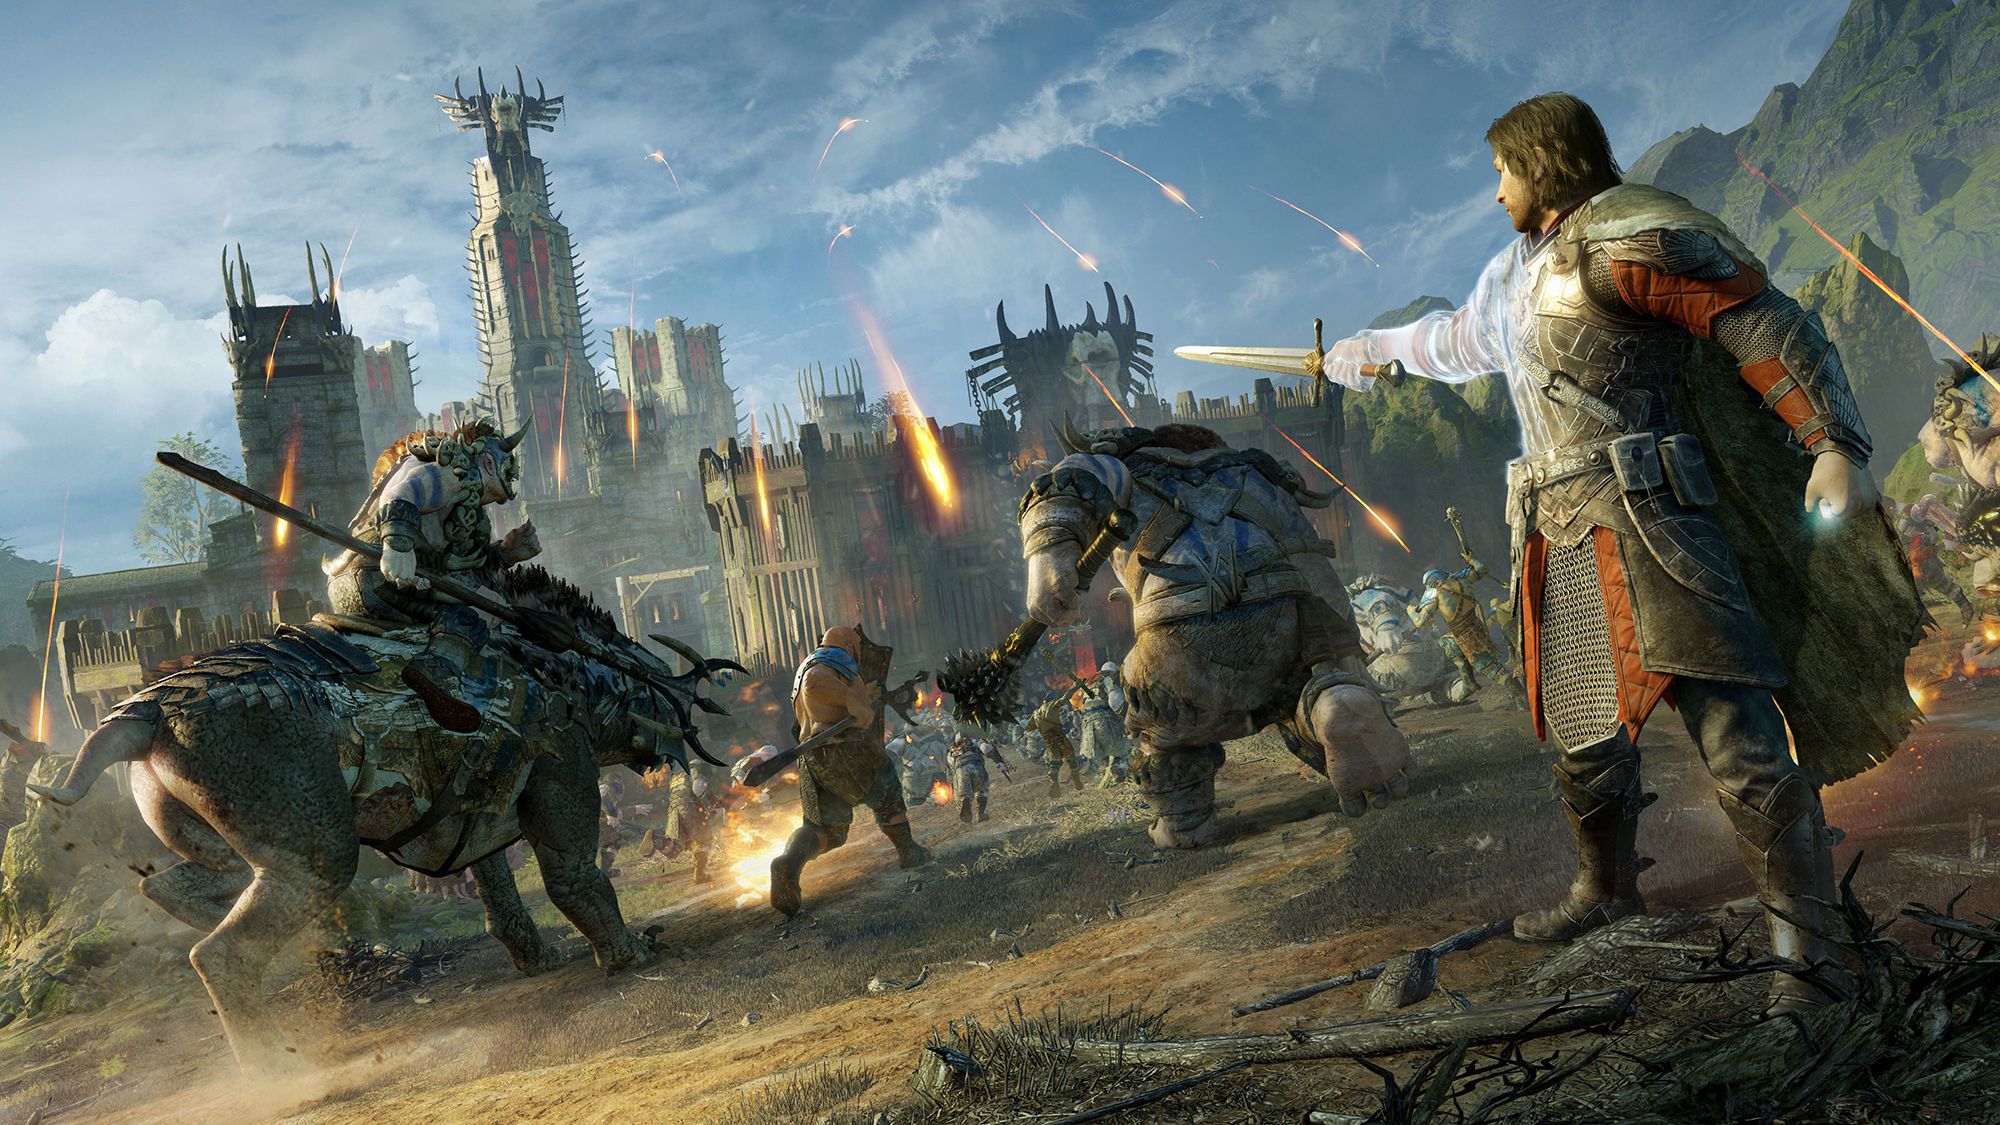 Game: MiddleEarth Shadow of Mordor Series Review